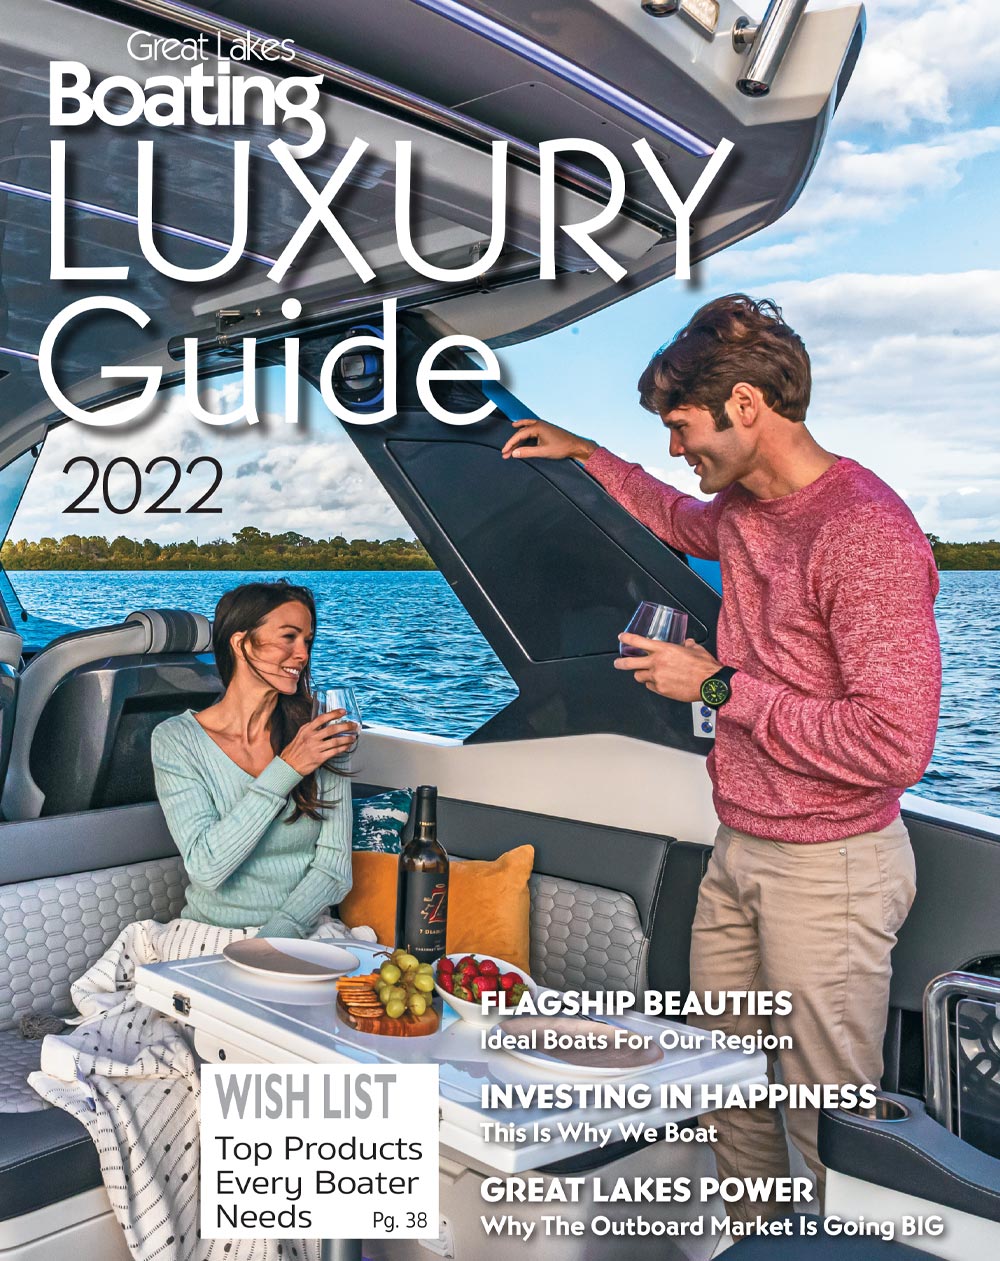 Great Lakes Boating Luxury Guide 2022 cover